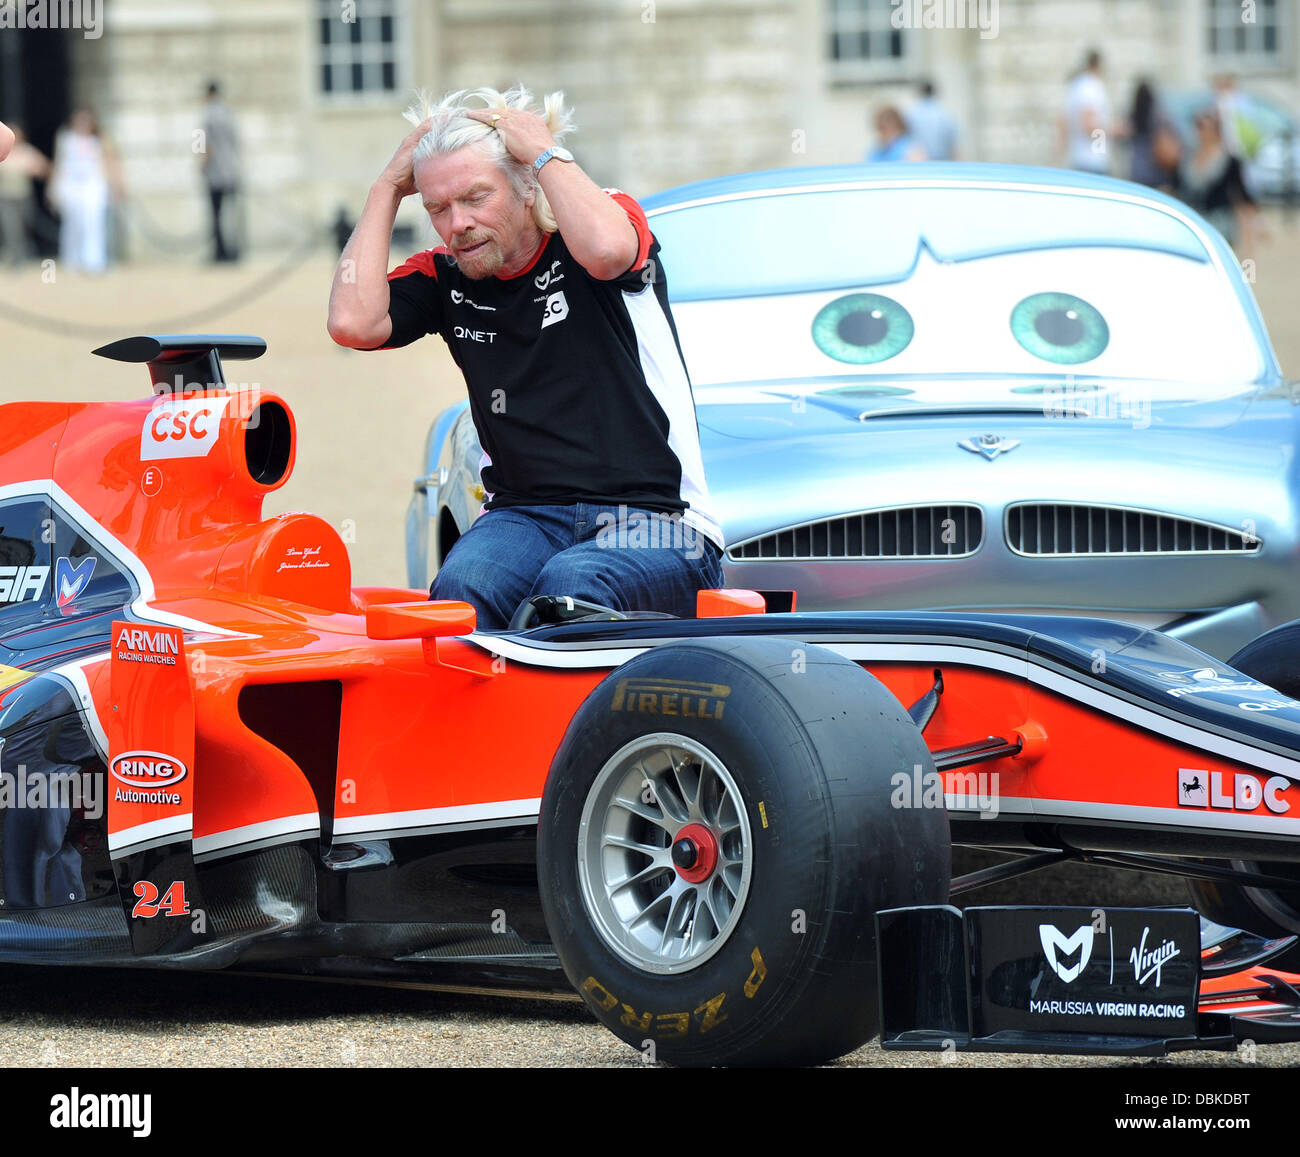 Sir Richard Branson The launch of Disney Pixars new film CARS 2 and its partnership with the Marussia Virgin Racing Team at the British Grand Prix 